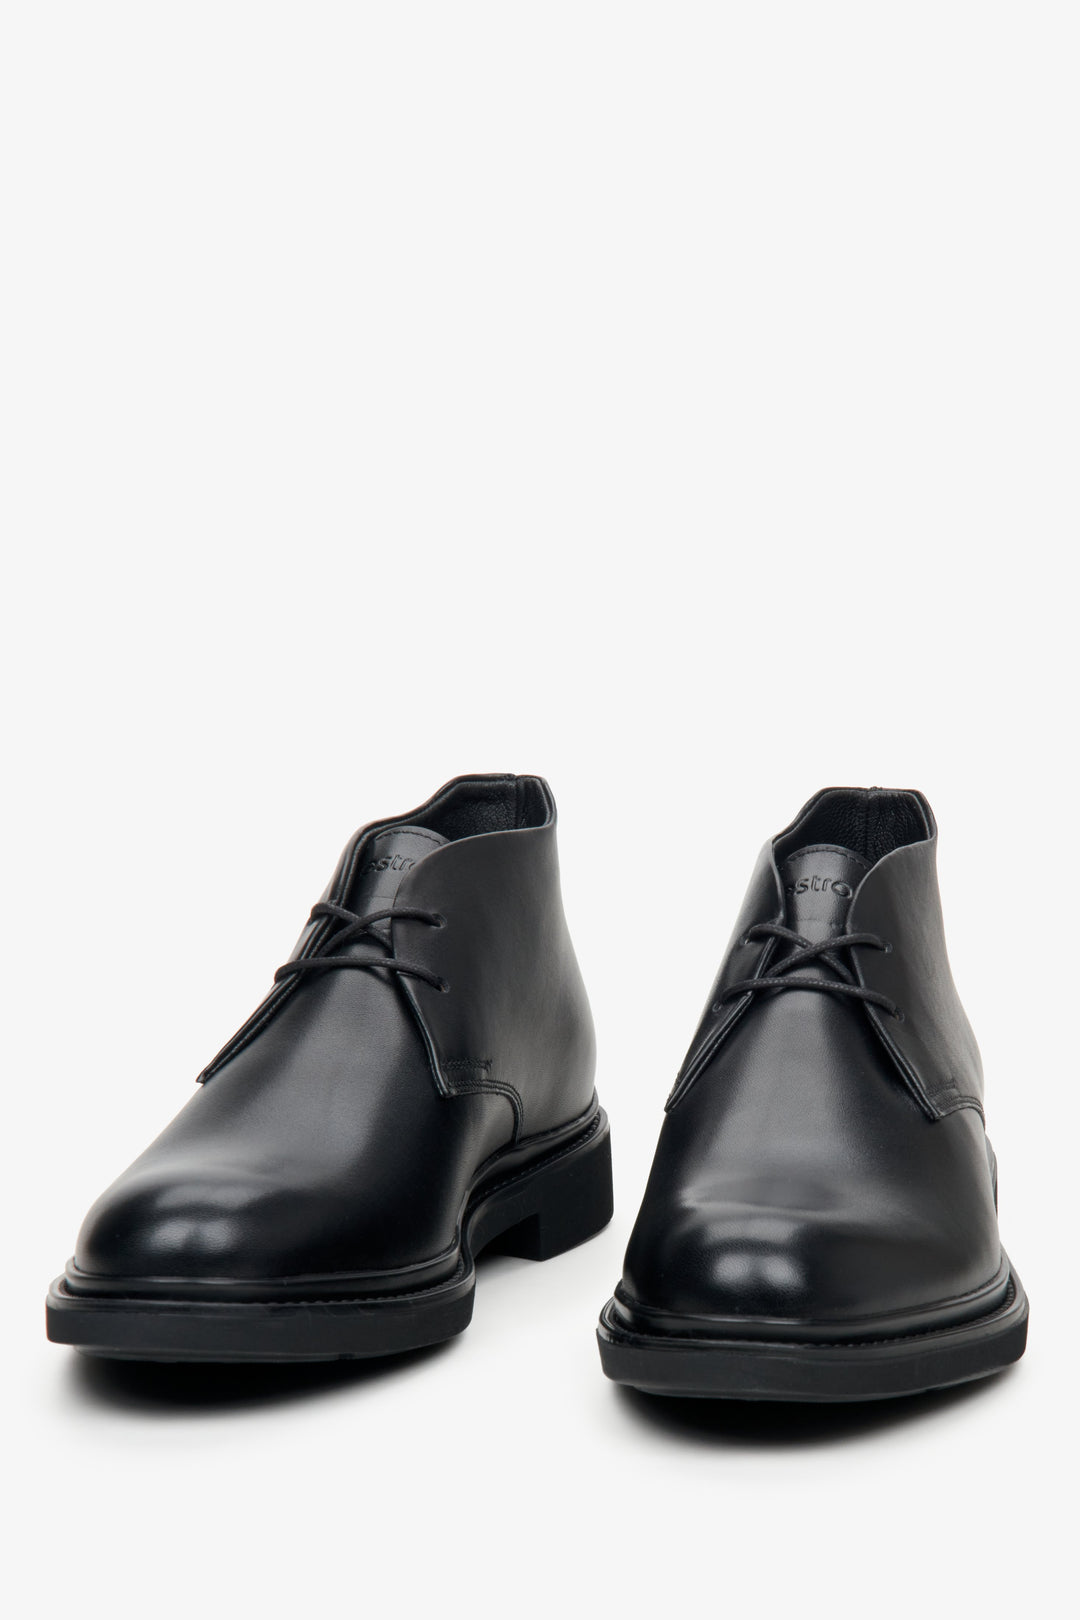 Men's black leather short boots by Estro - close-up on the toe of the boot.